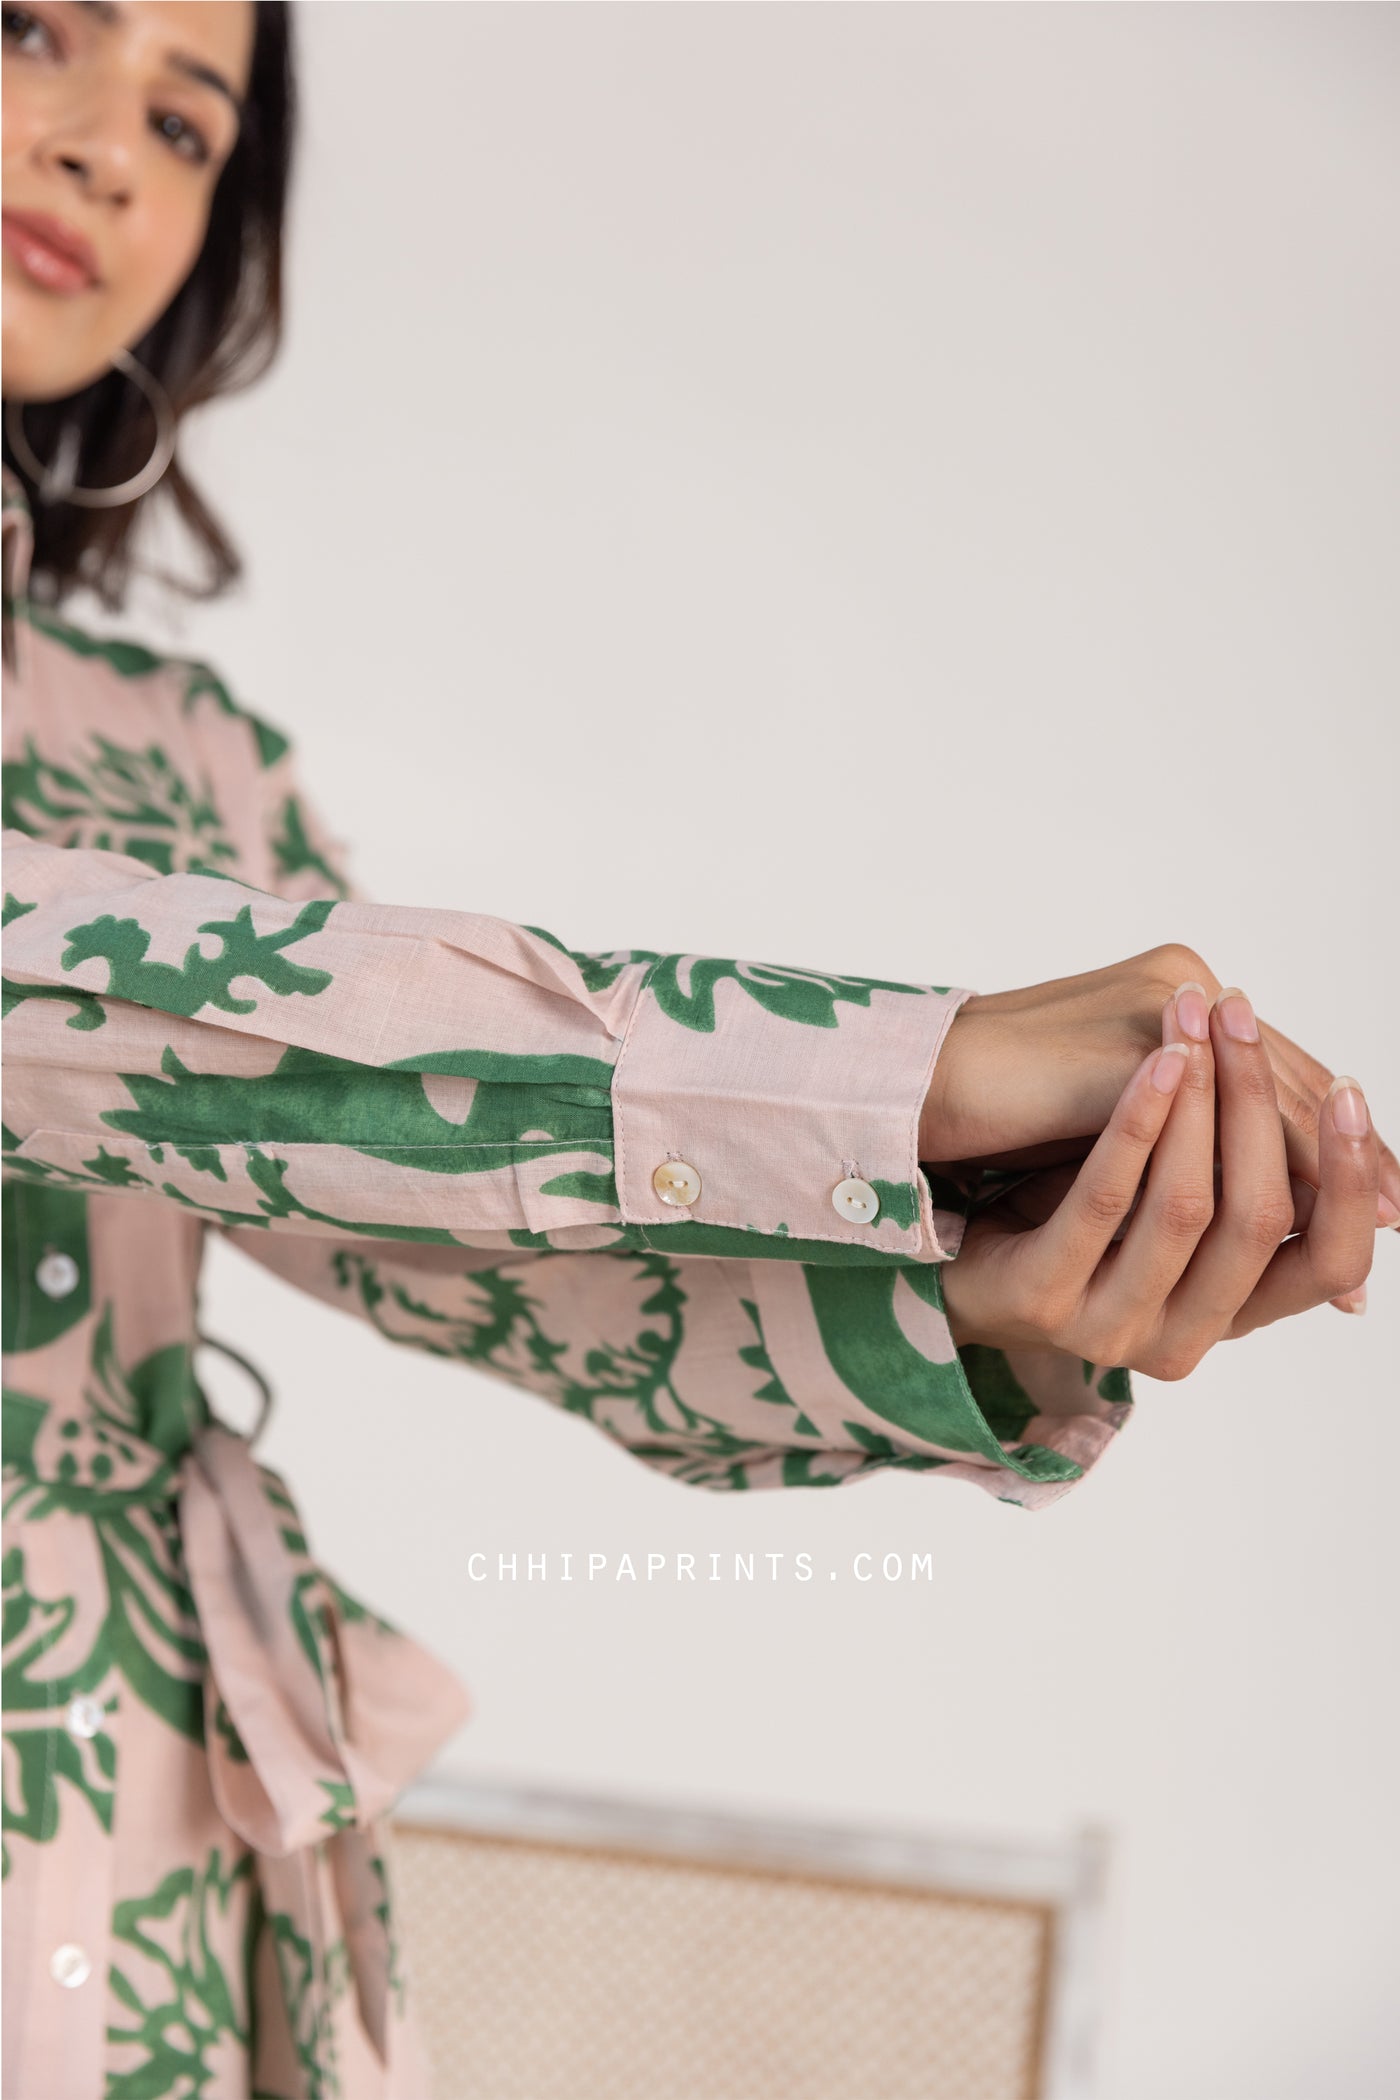 Cotton Anar Jaal Print Long Shirt Dress with Belt in Shades of Green and Pink